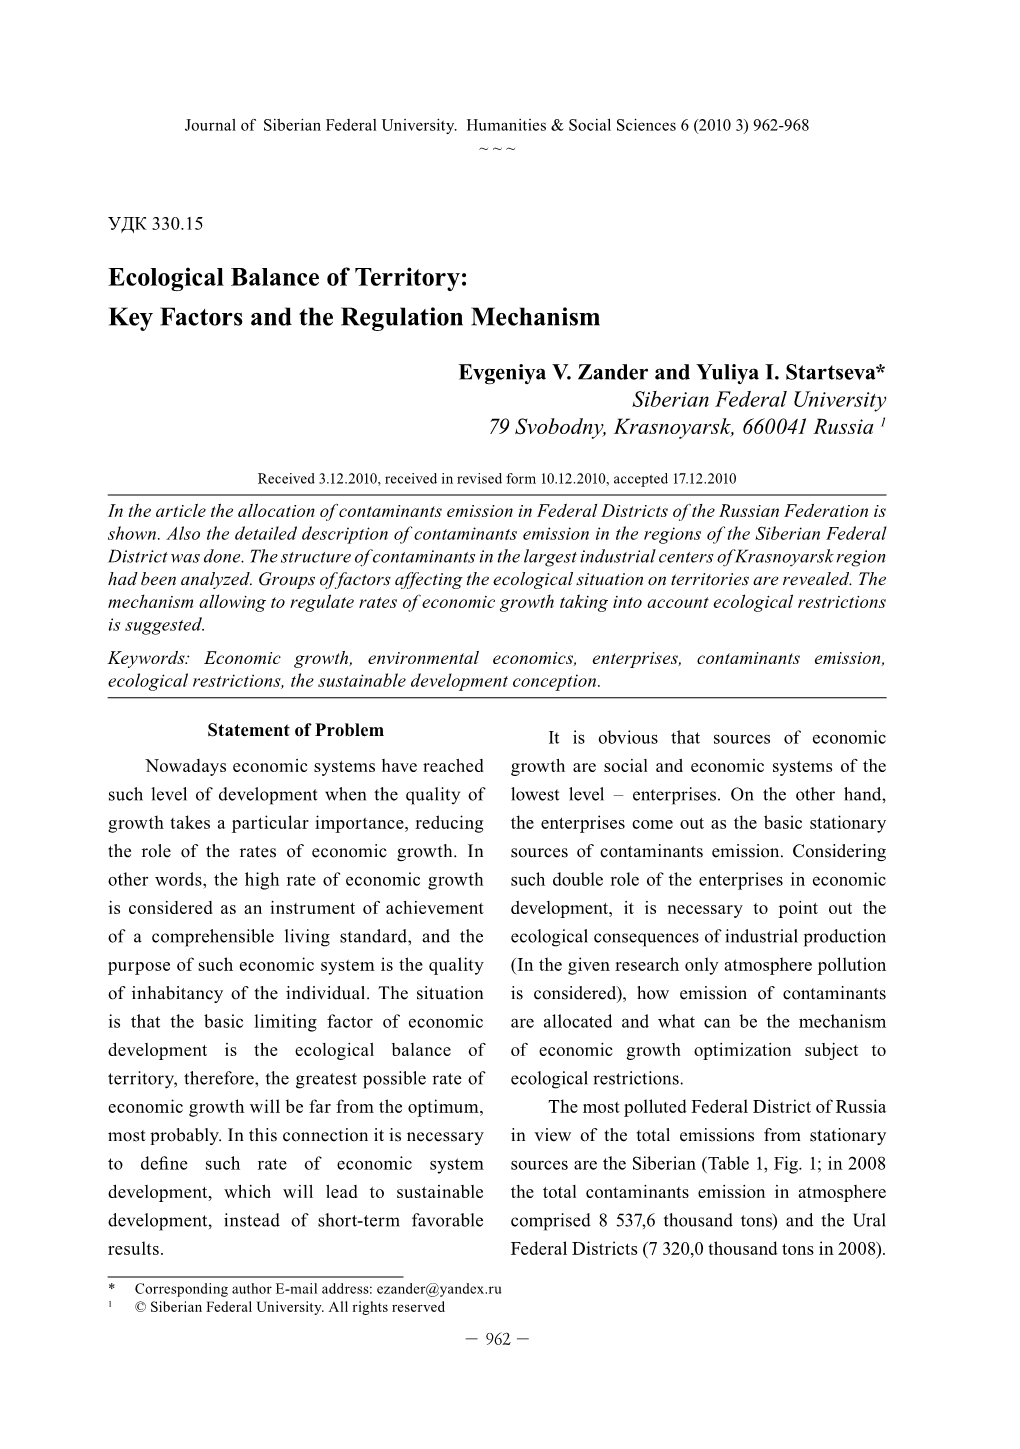 Ecological Balance of Territory: Key Factors and the Regulation Mechanism